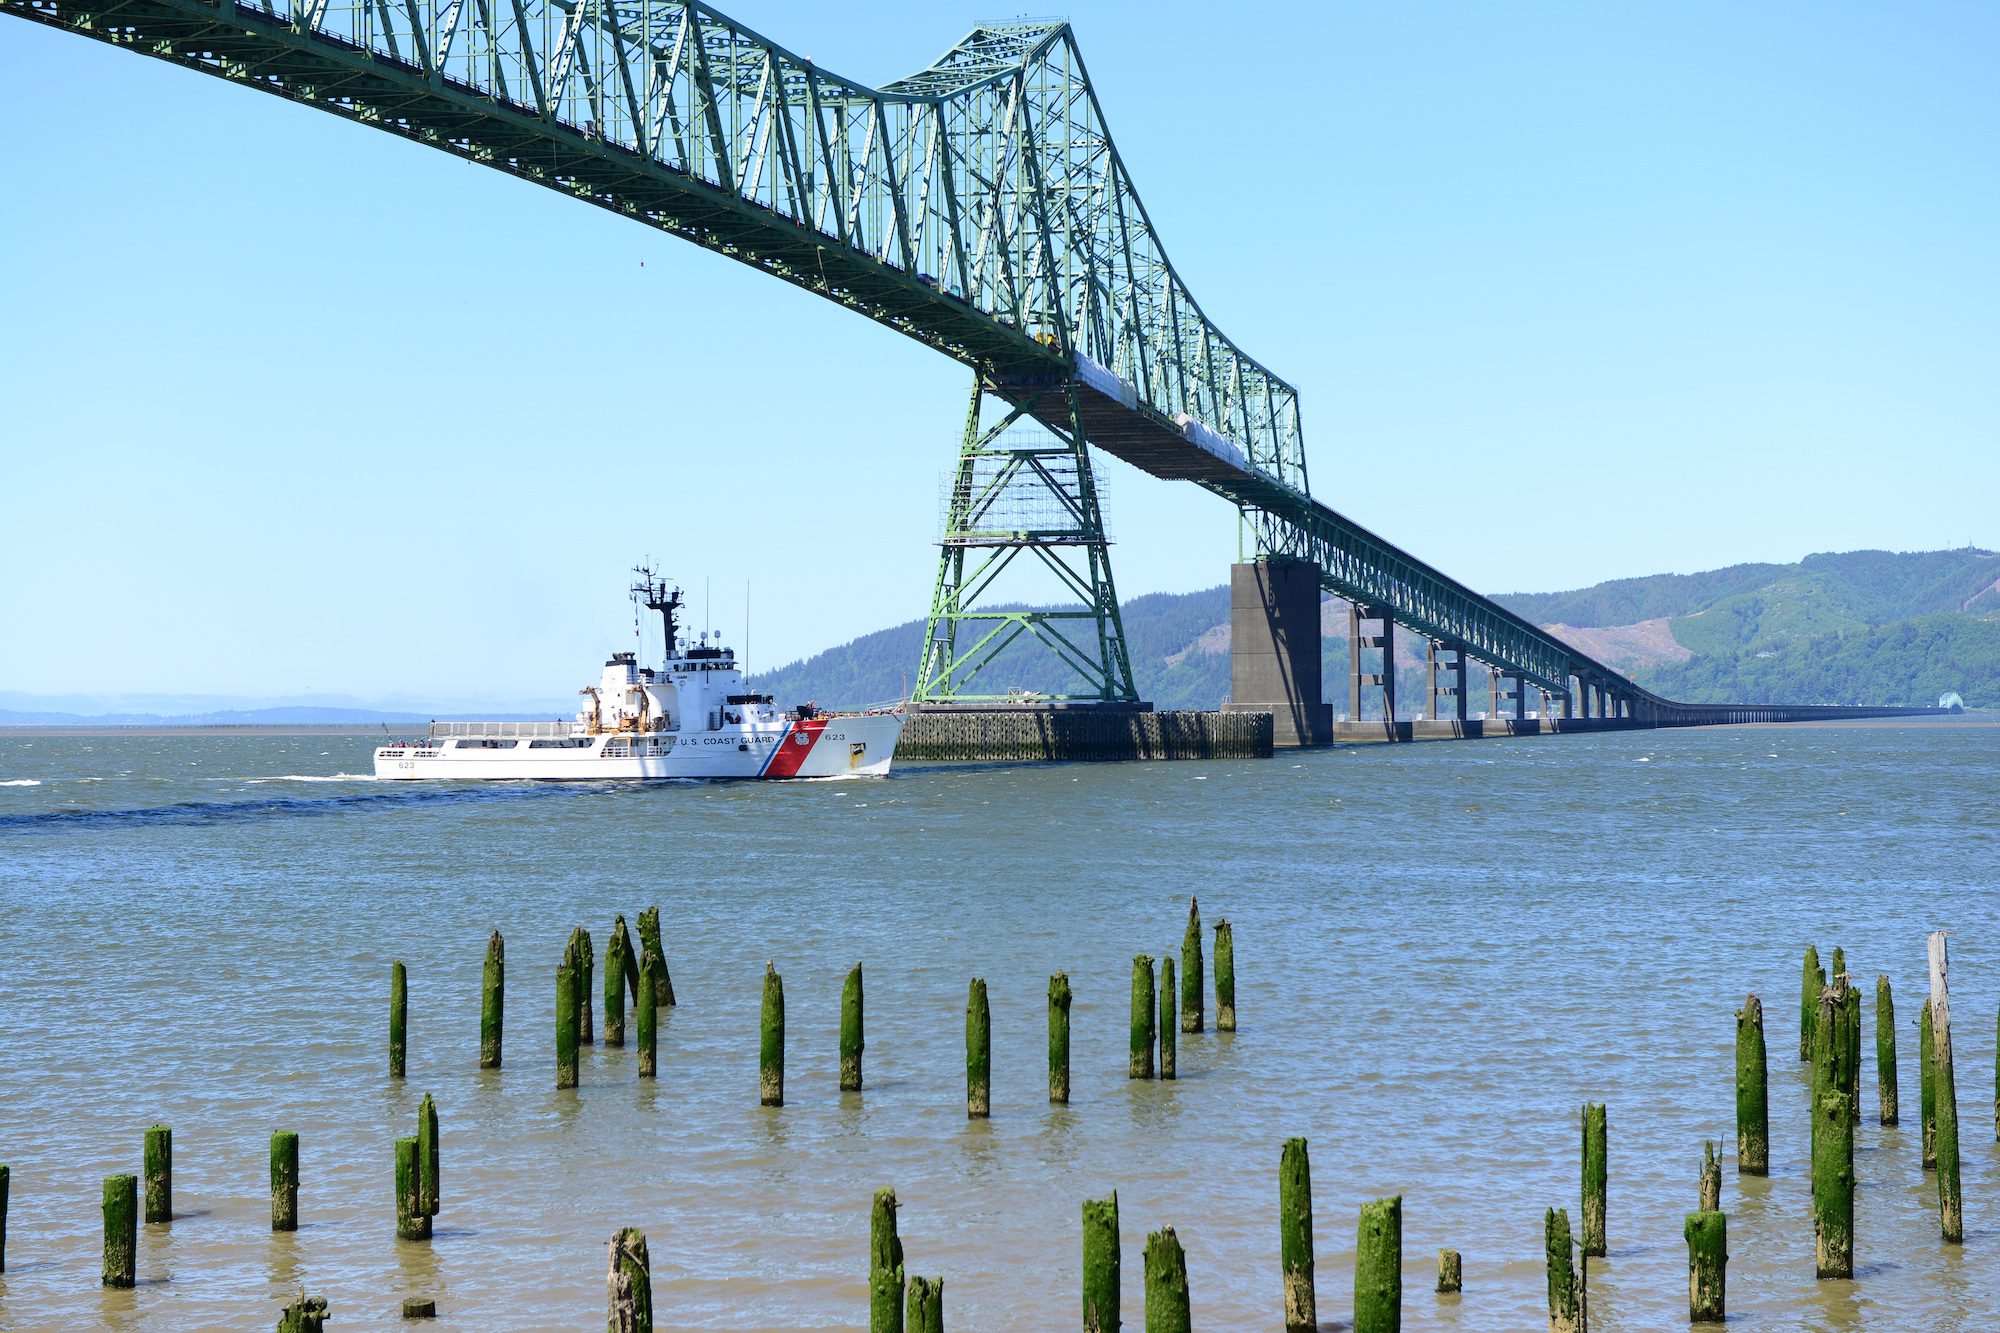 The Coast Guard Cutter Steadfast, a 210-foot Medium-Endurance Cutter, transits up the Columbia River and under the Astoria-Meglar Bridge as it returns to its homeport in Astoria, Ore., May 11, 2016. U.S. Coast Guard Photo